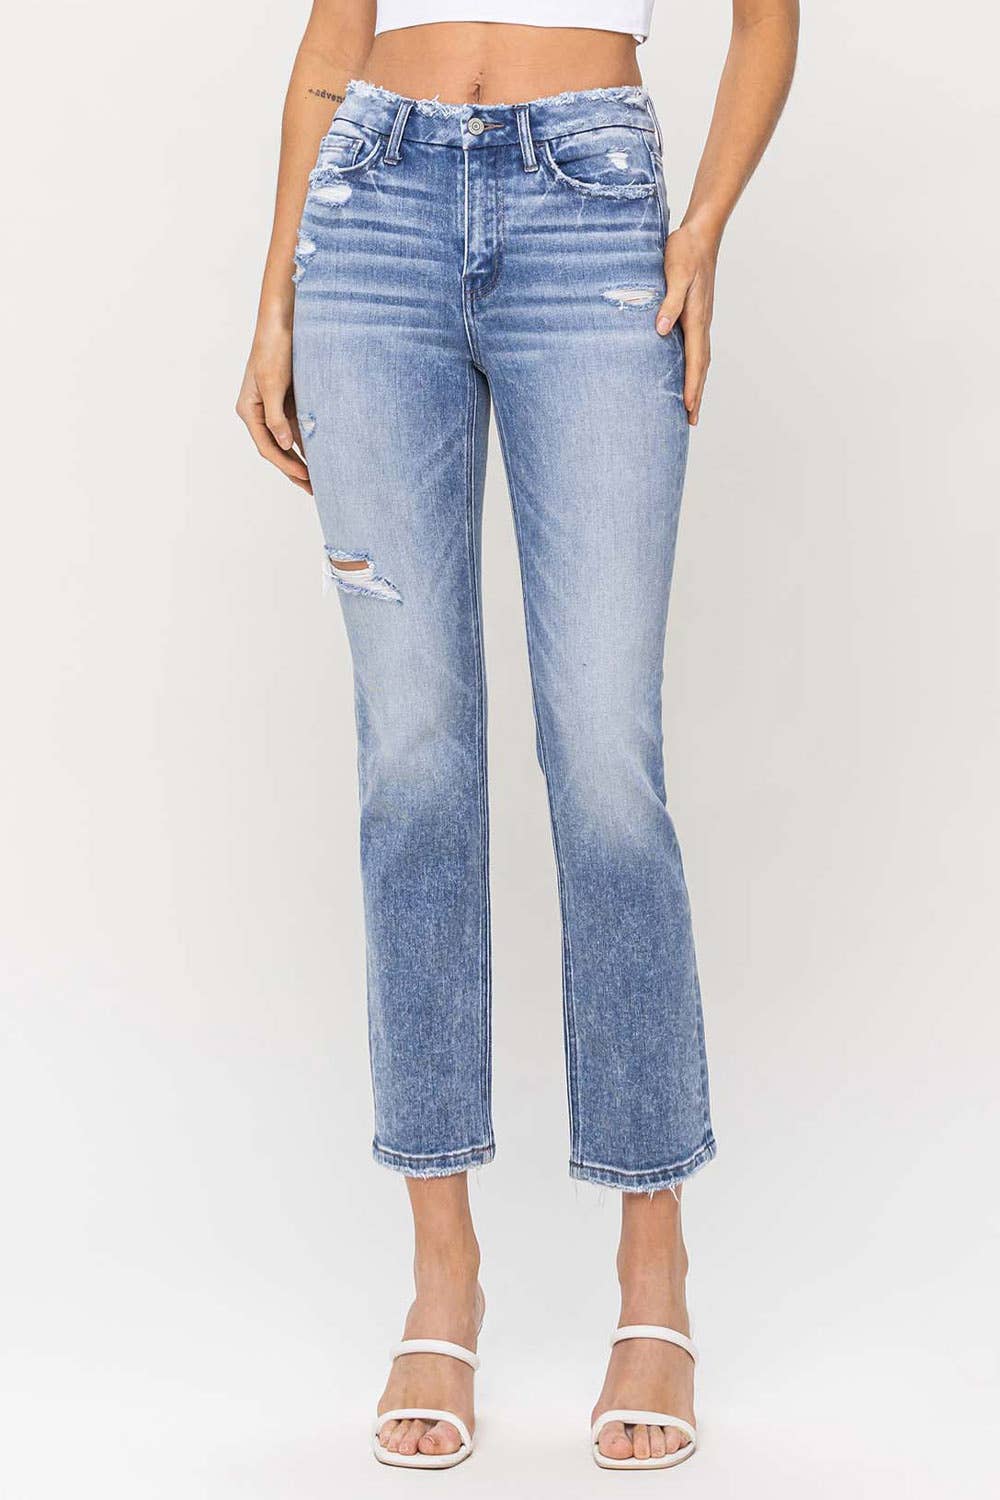 FLYING MONKEY - HIGH RISE CROP SLIM STRAIGHT JEAN F5104: CONVENIENTLY / 24